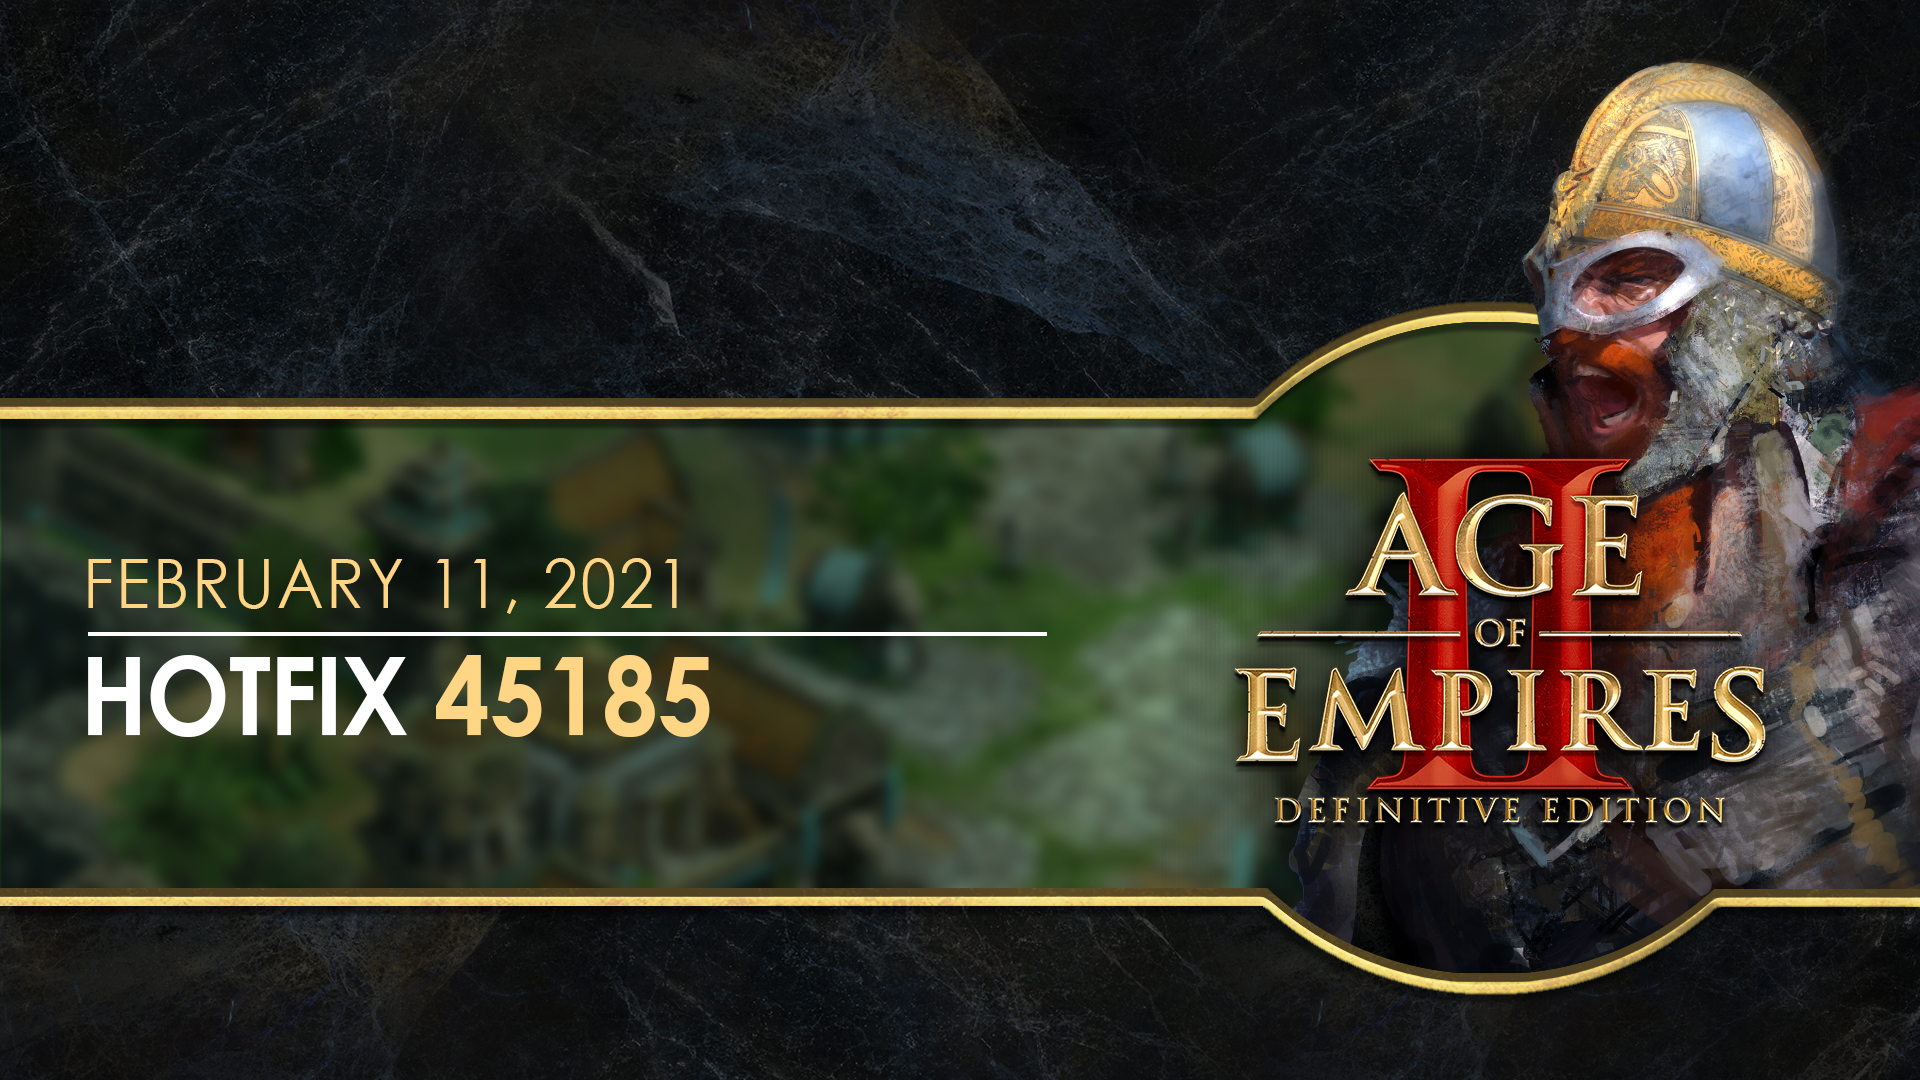 age of empires 2 hd crashes mid game